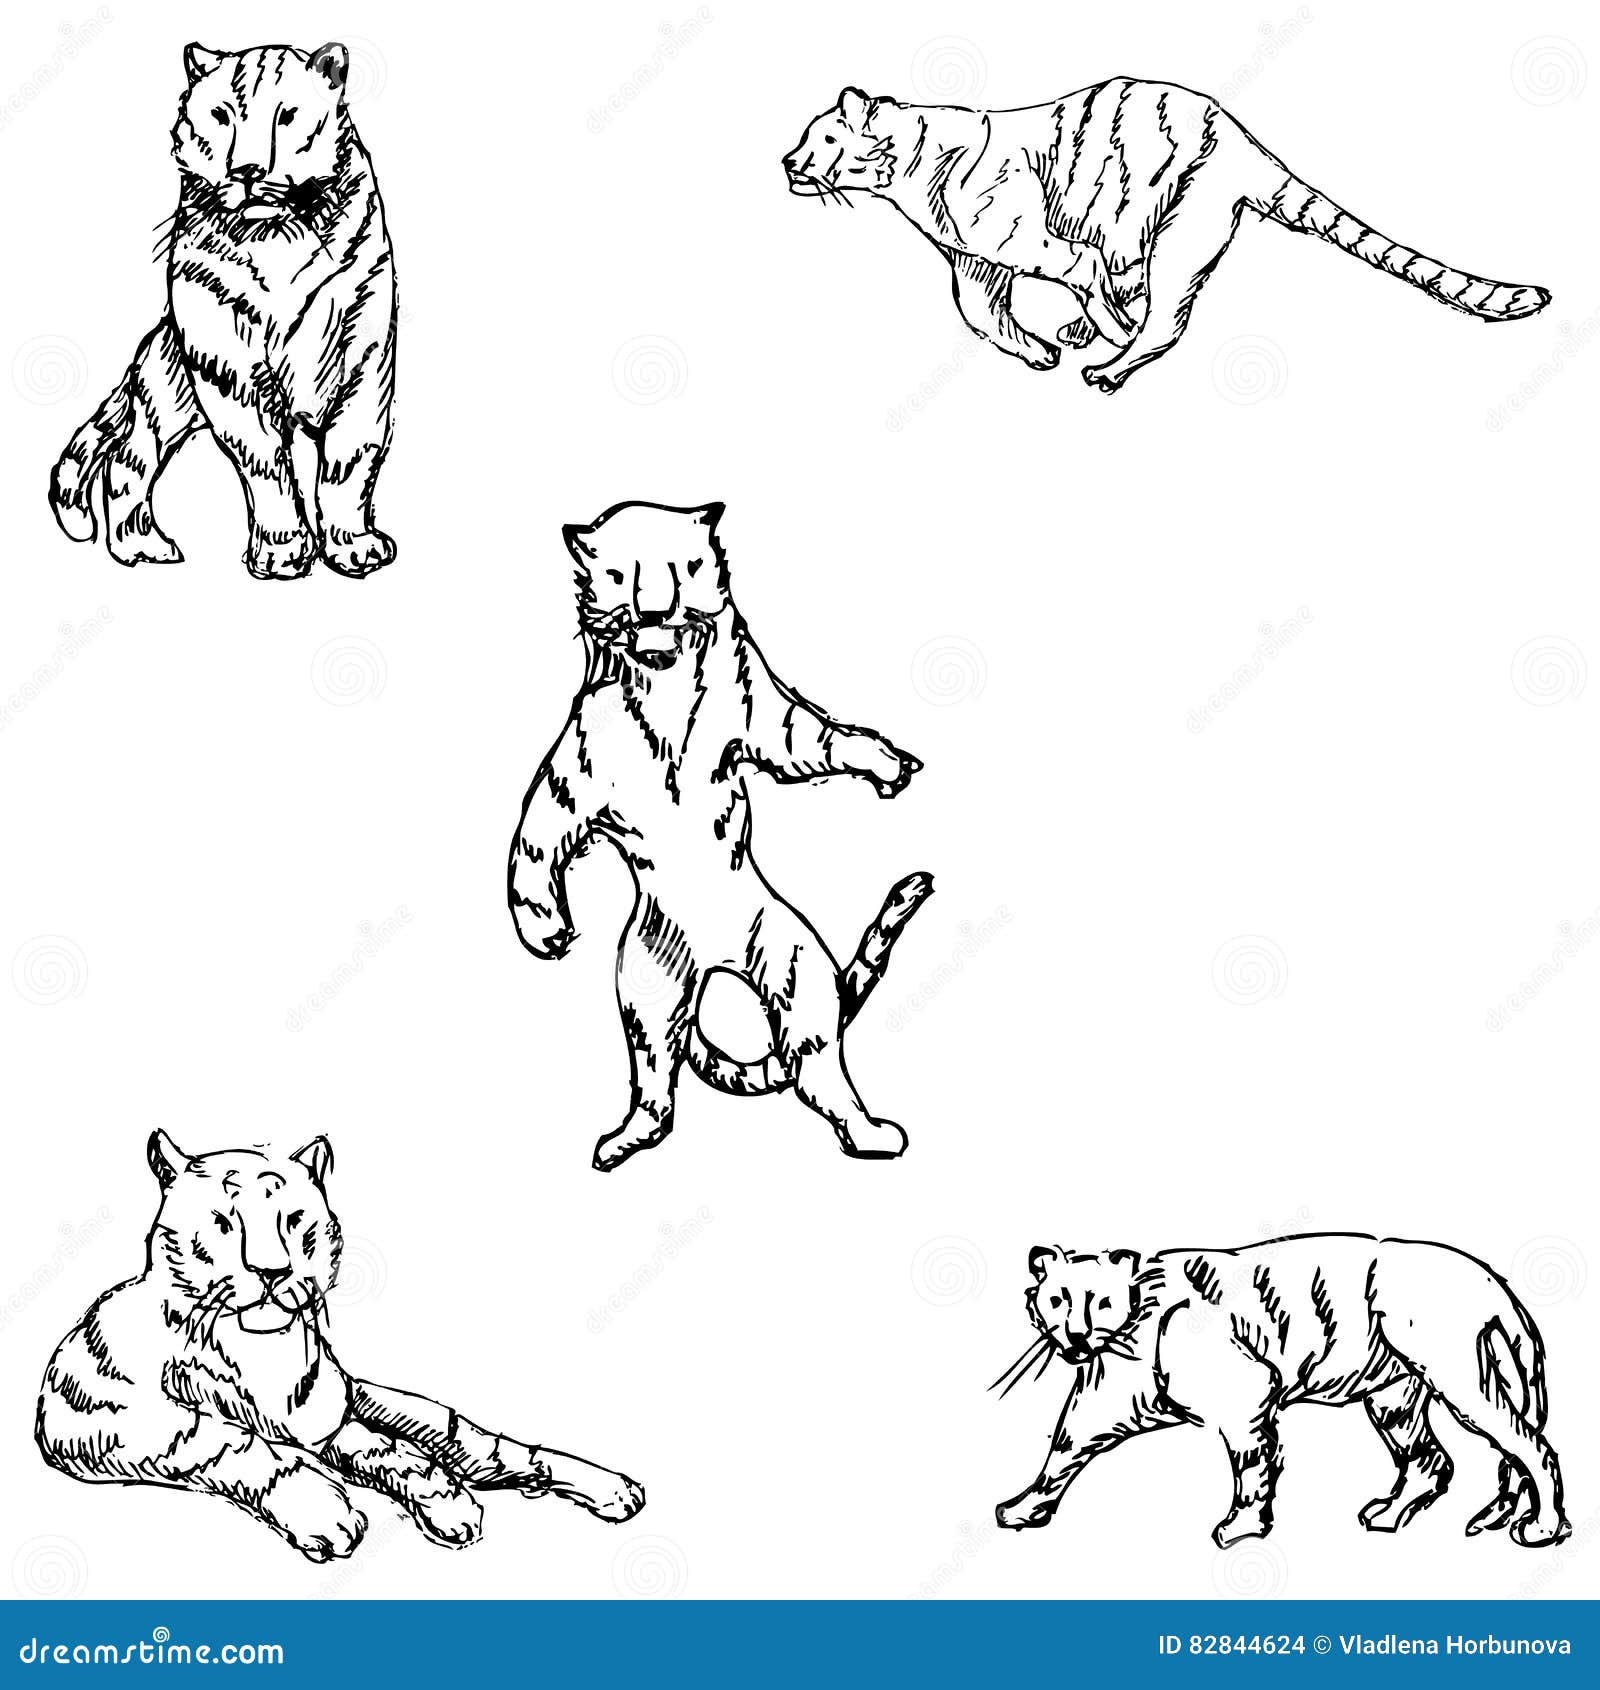 Tigers. a sketch by hand stock vector. Illustration of dangerous - 82844624